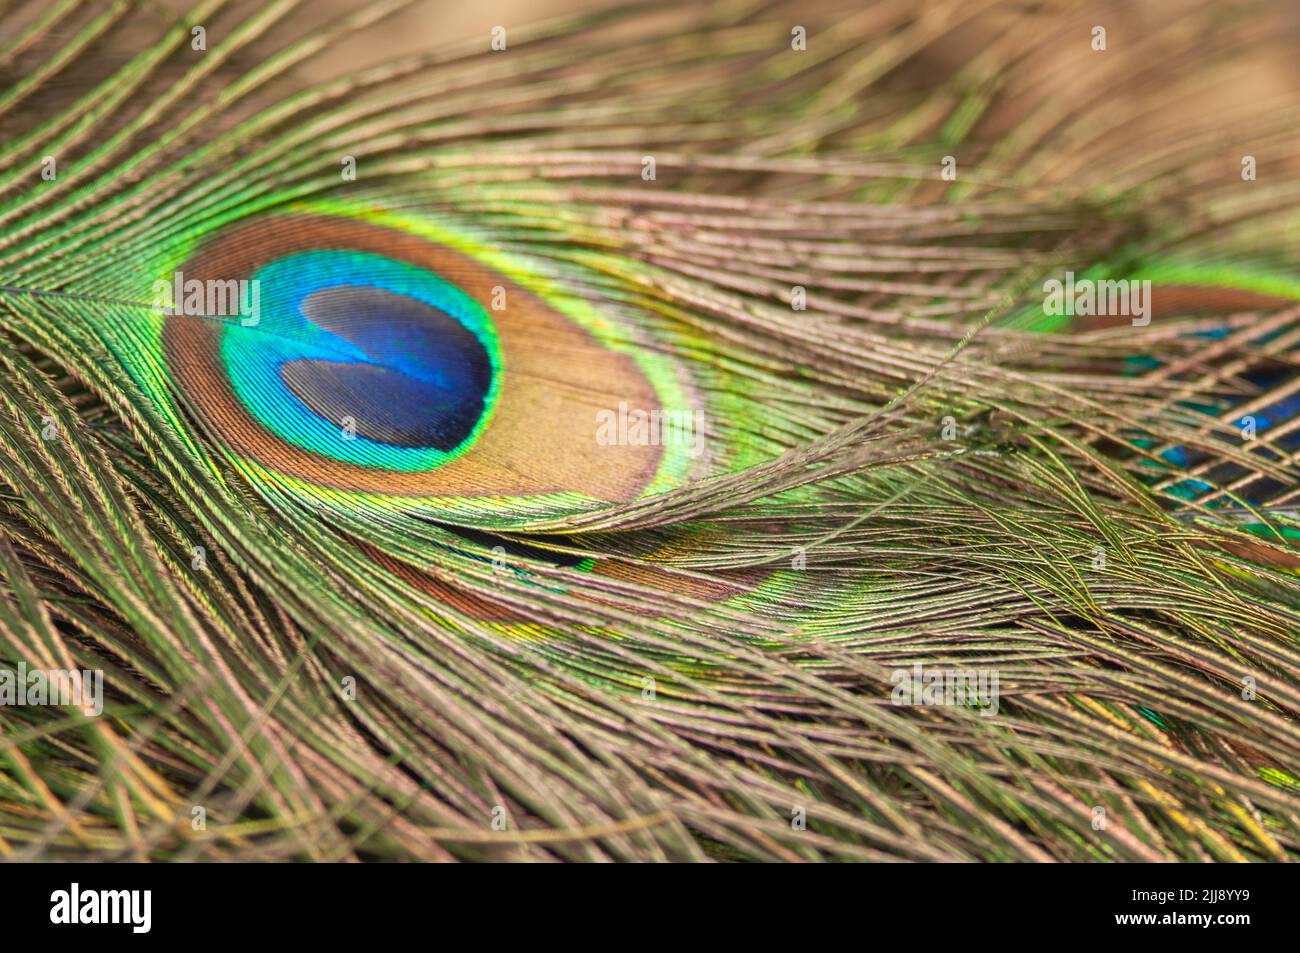 Peacock feather close up Foto Stock